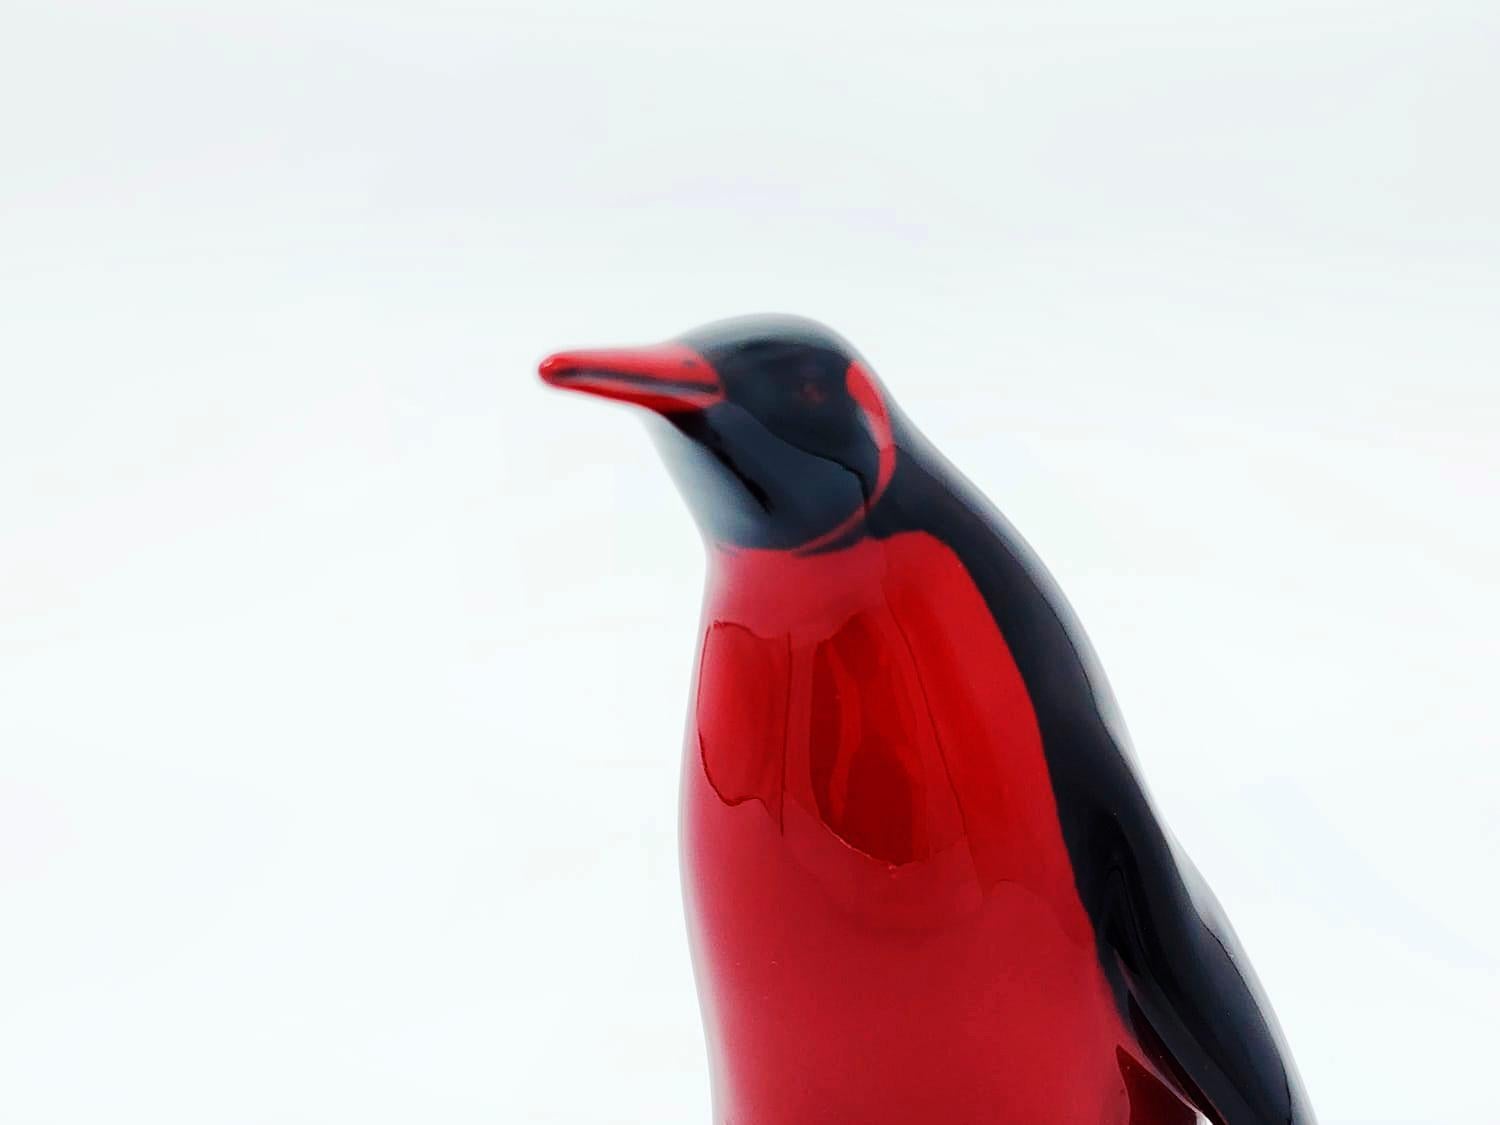 Royal Doulton Porcelain Figure made in England.
Emperor Penguin Figure in Red and Black Flambe
Measures:
Height: 15 centimeters
Length: 6.5 centimeters
Depth: 7 centimeters